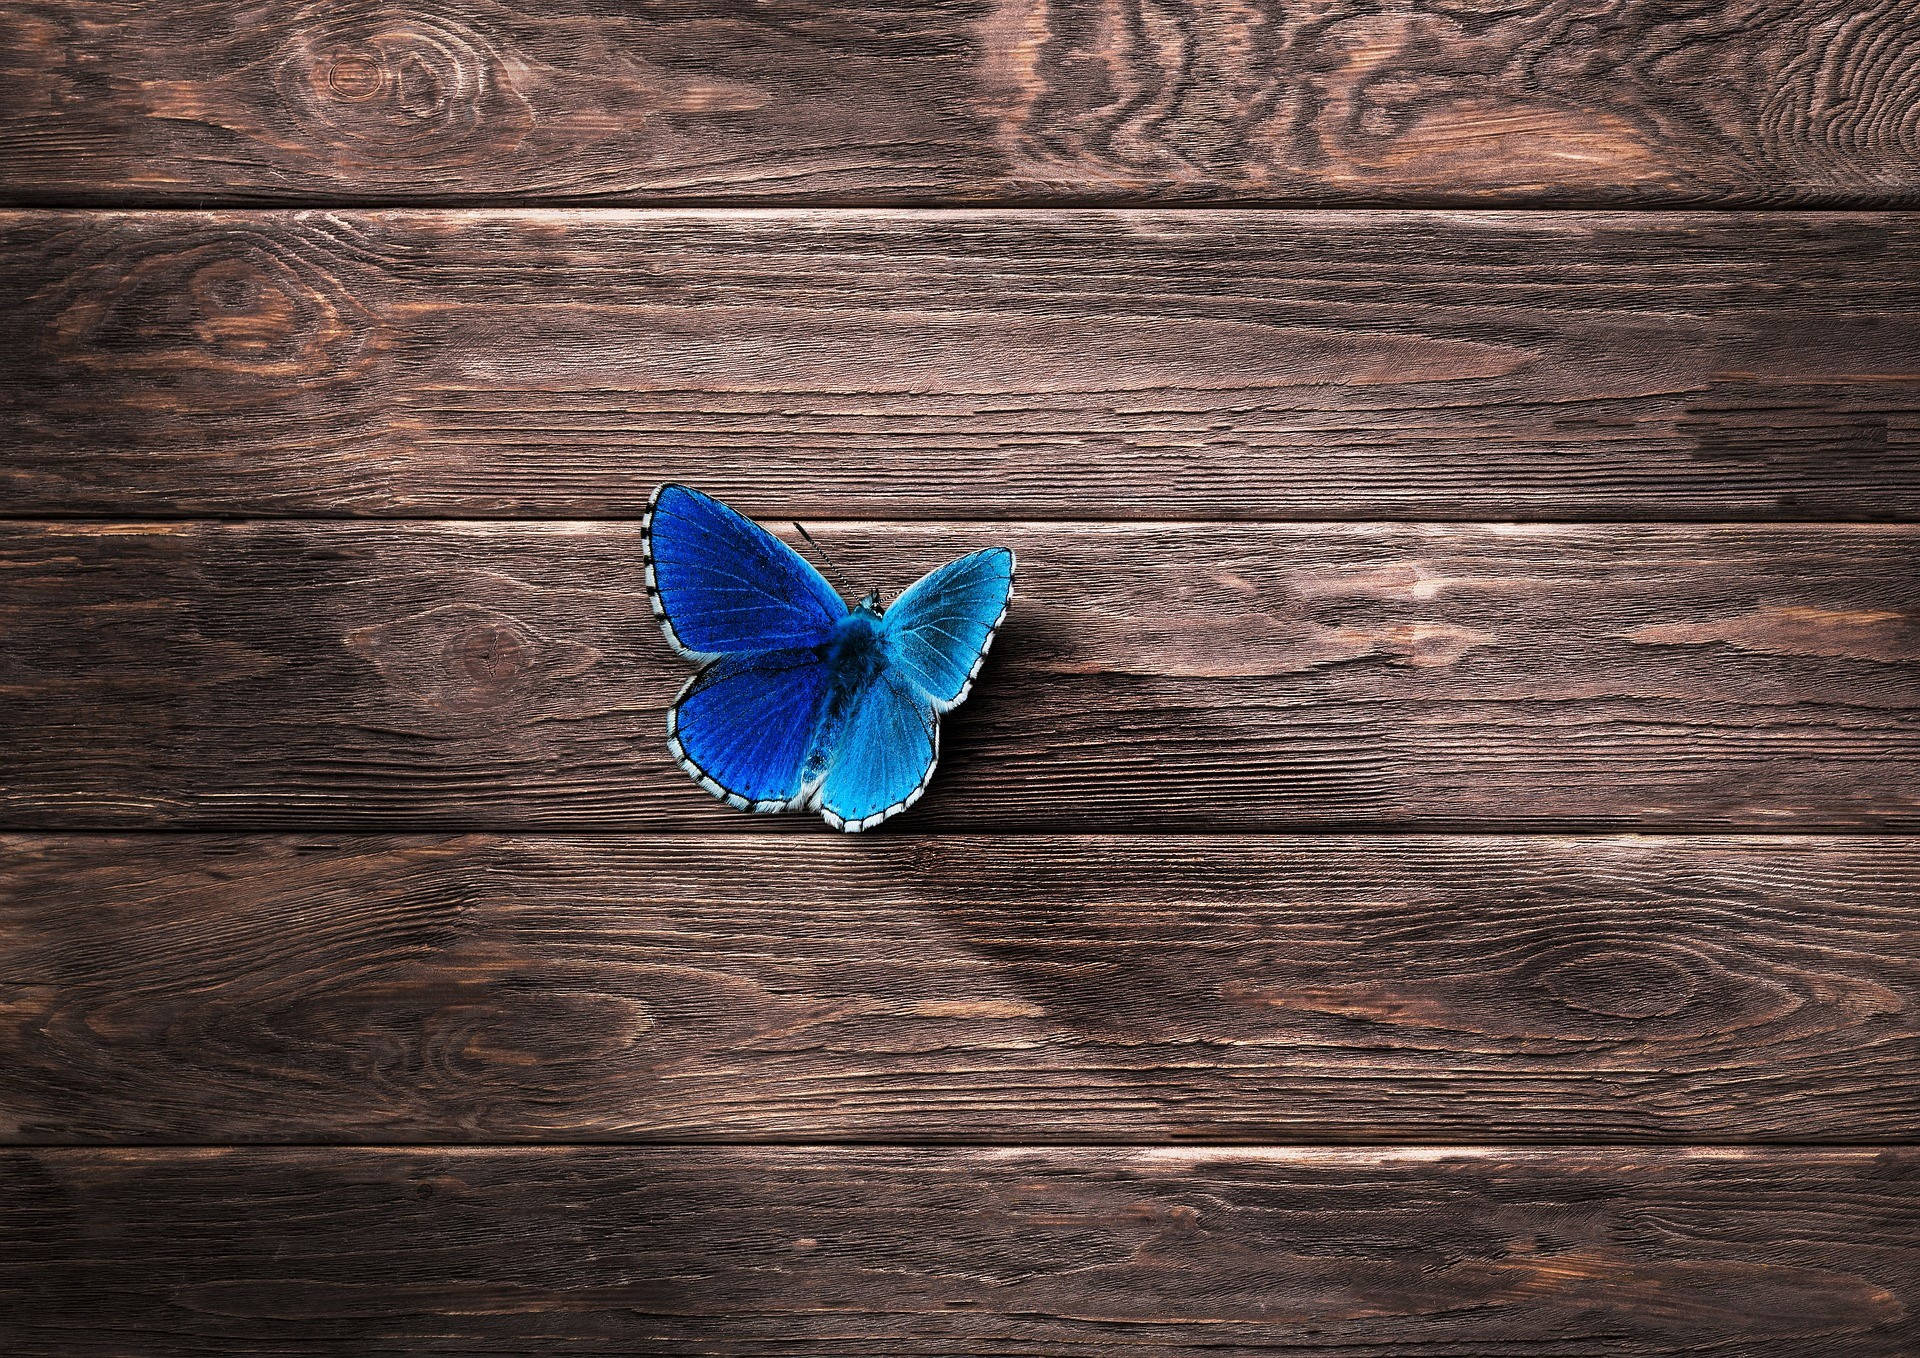 Free Butterfly Wallpaper Downloads, [500+] Butterfly Wallpapers for FREE |  